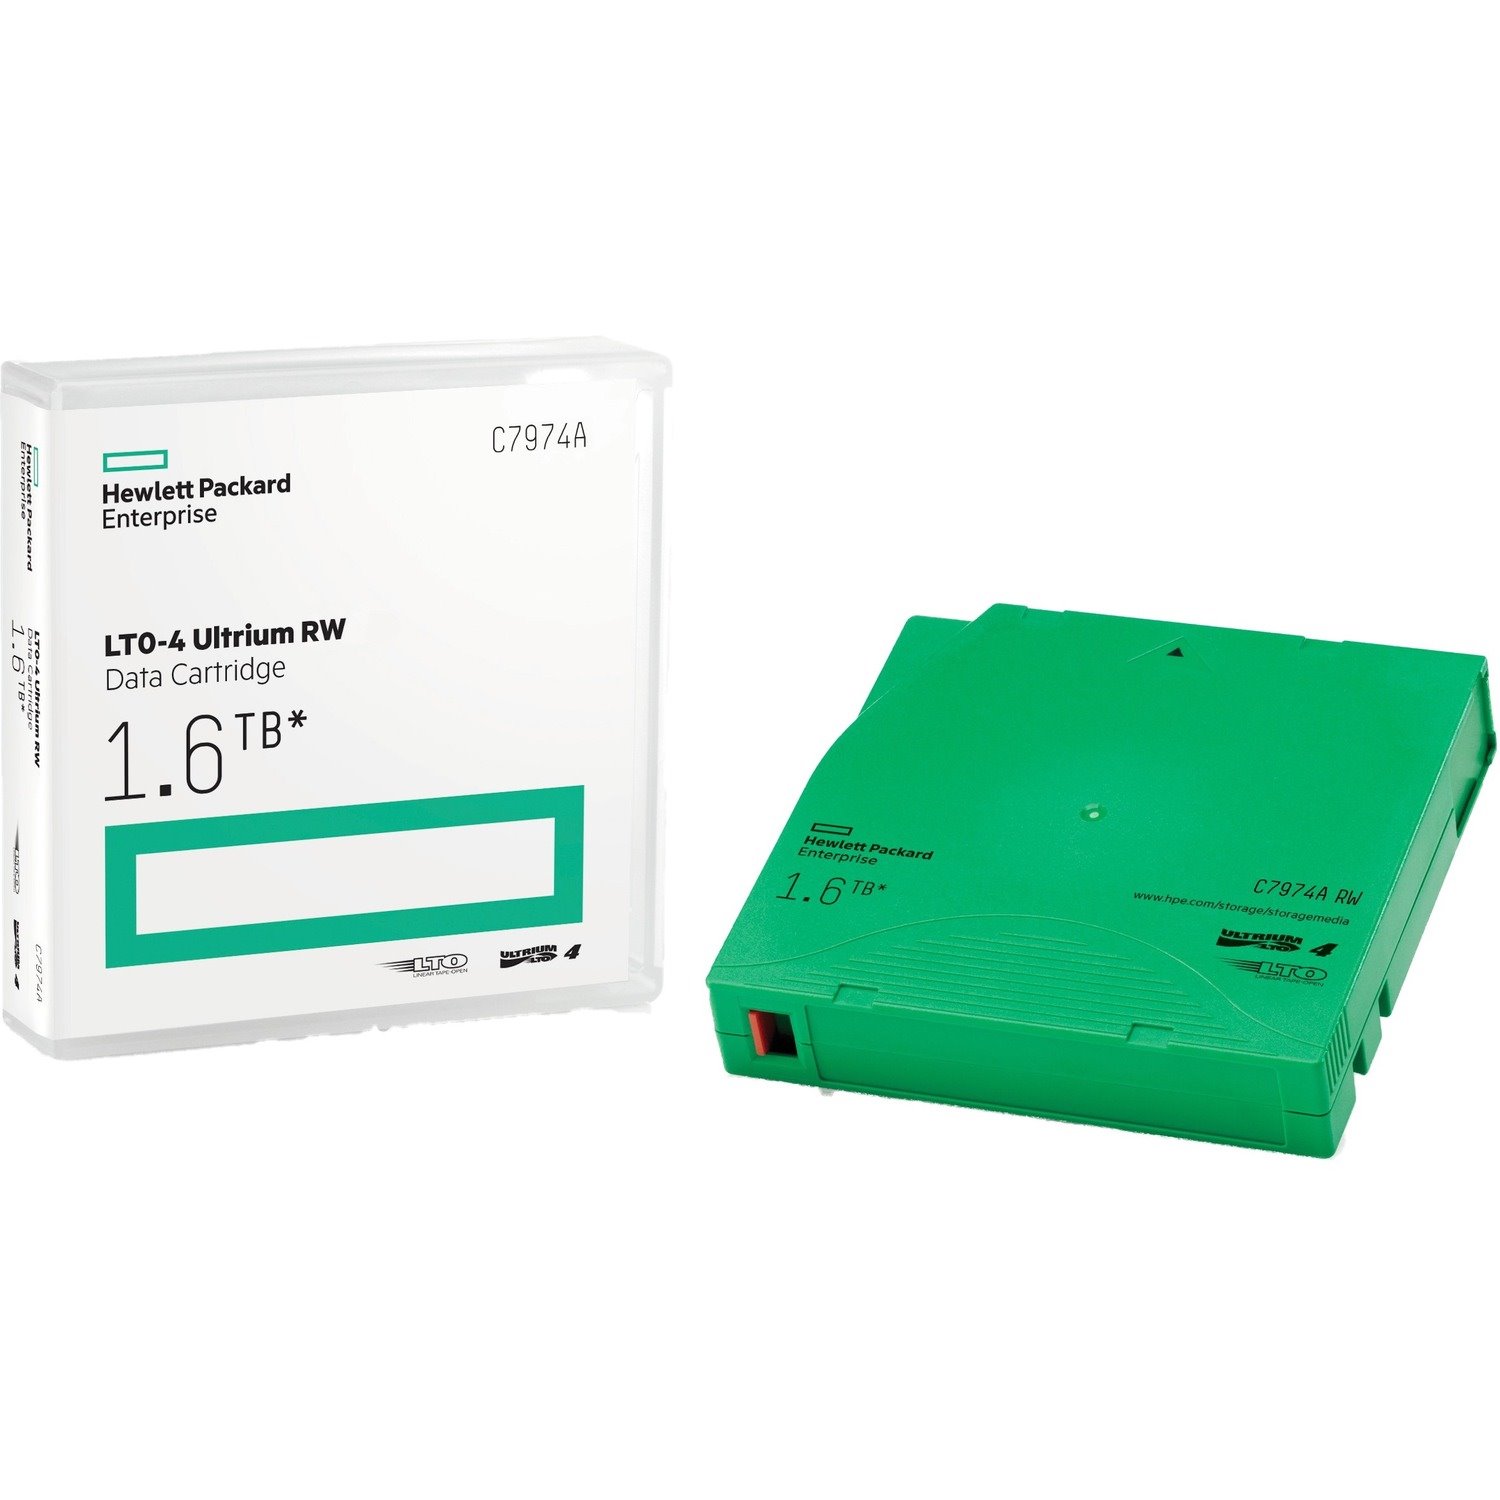 HPE Data Cartridge LTO-4 - Labeled - 20 Pack